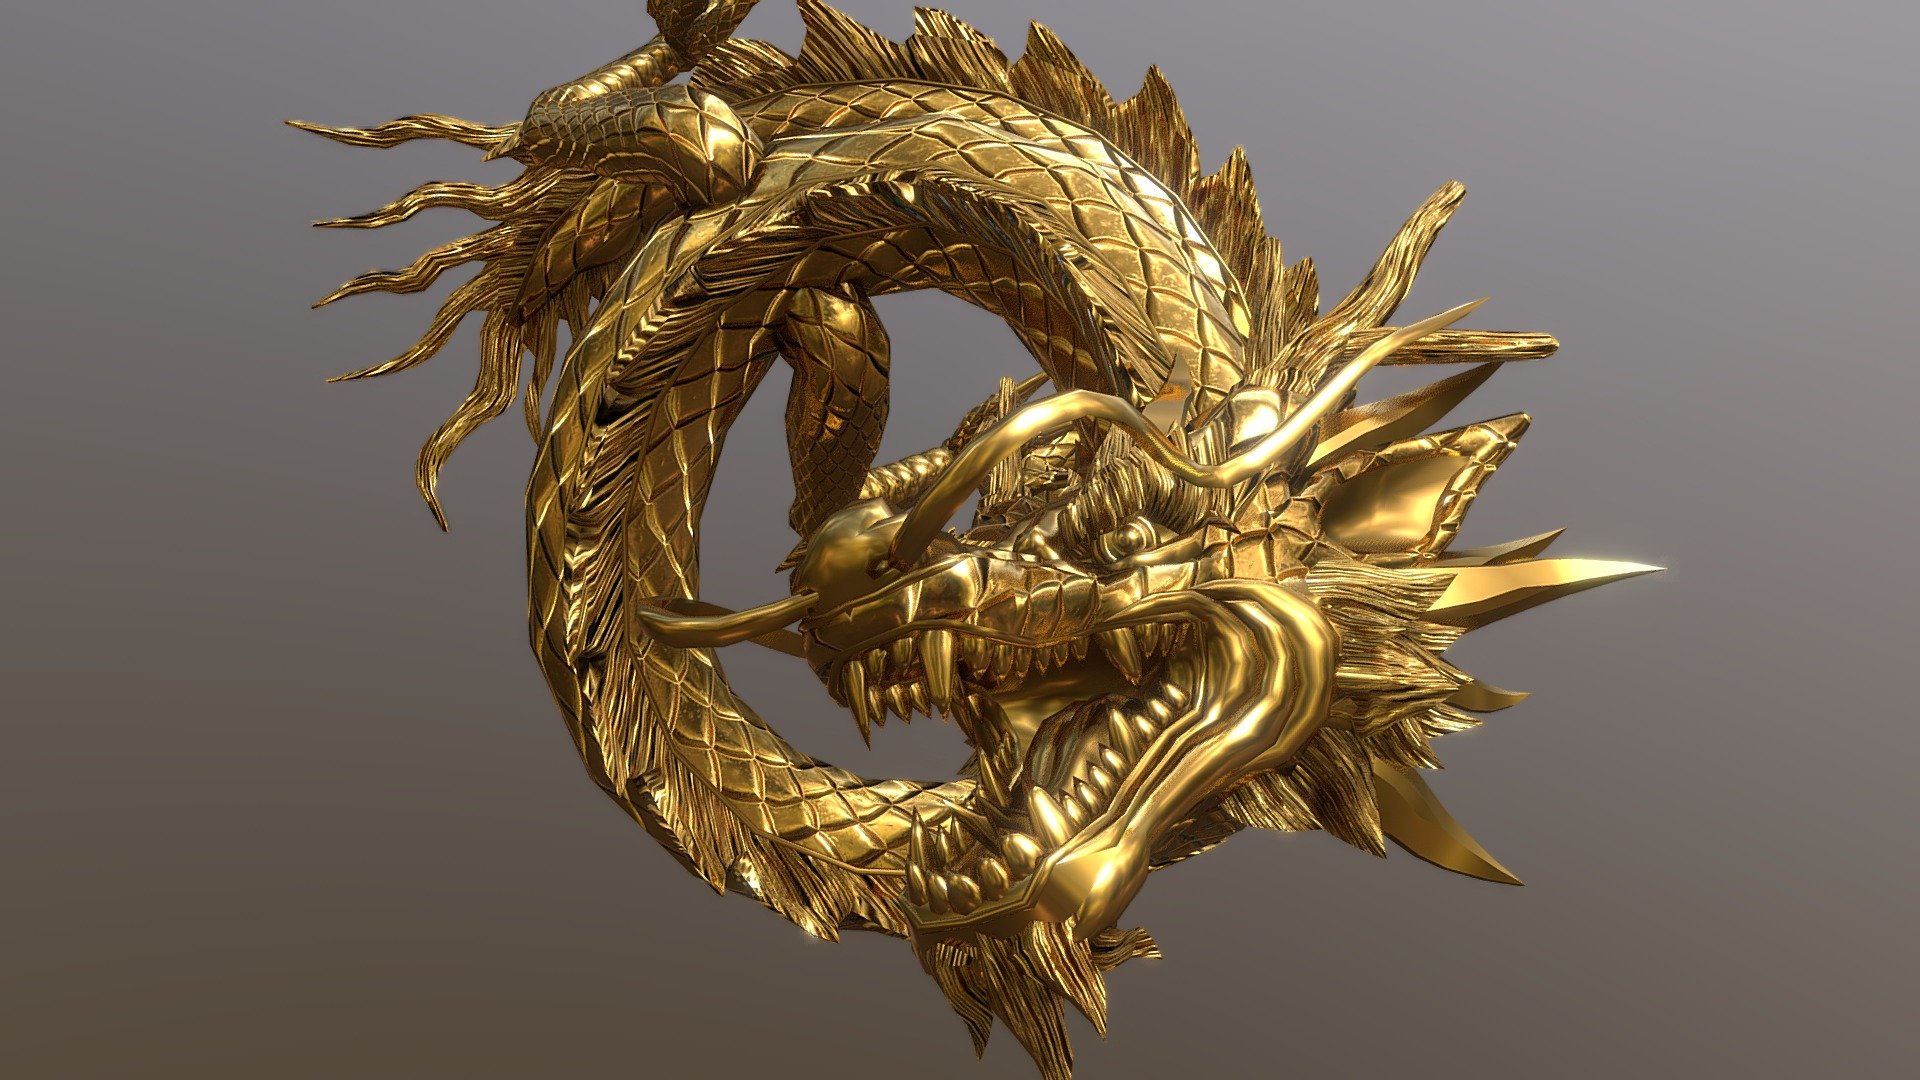 Rigged &amp; Animated Lowpoly Chinese Dragon for game,AR, VR project - Lowpoly Rigged Dragon - Buy Royalty Free 3D model by Underground Lab (@xaverius0404) 3d model